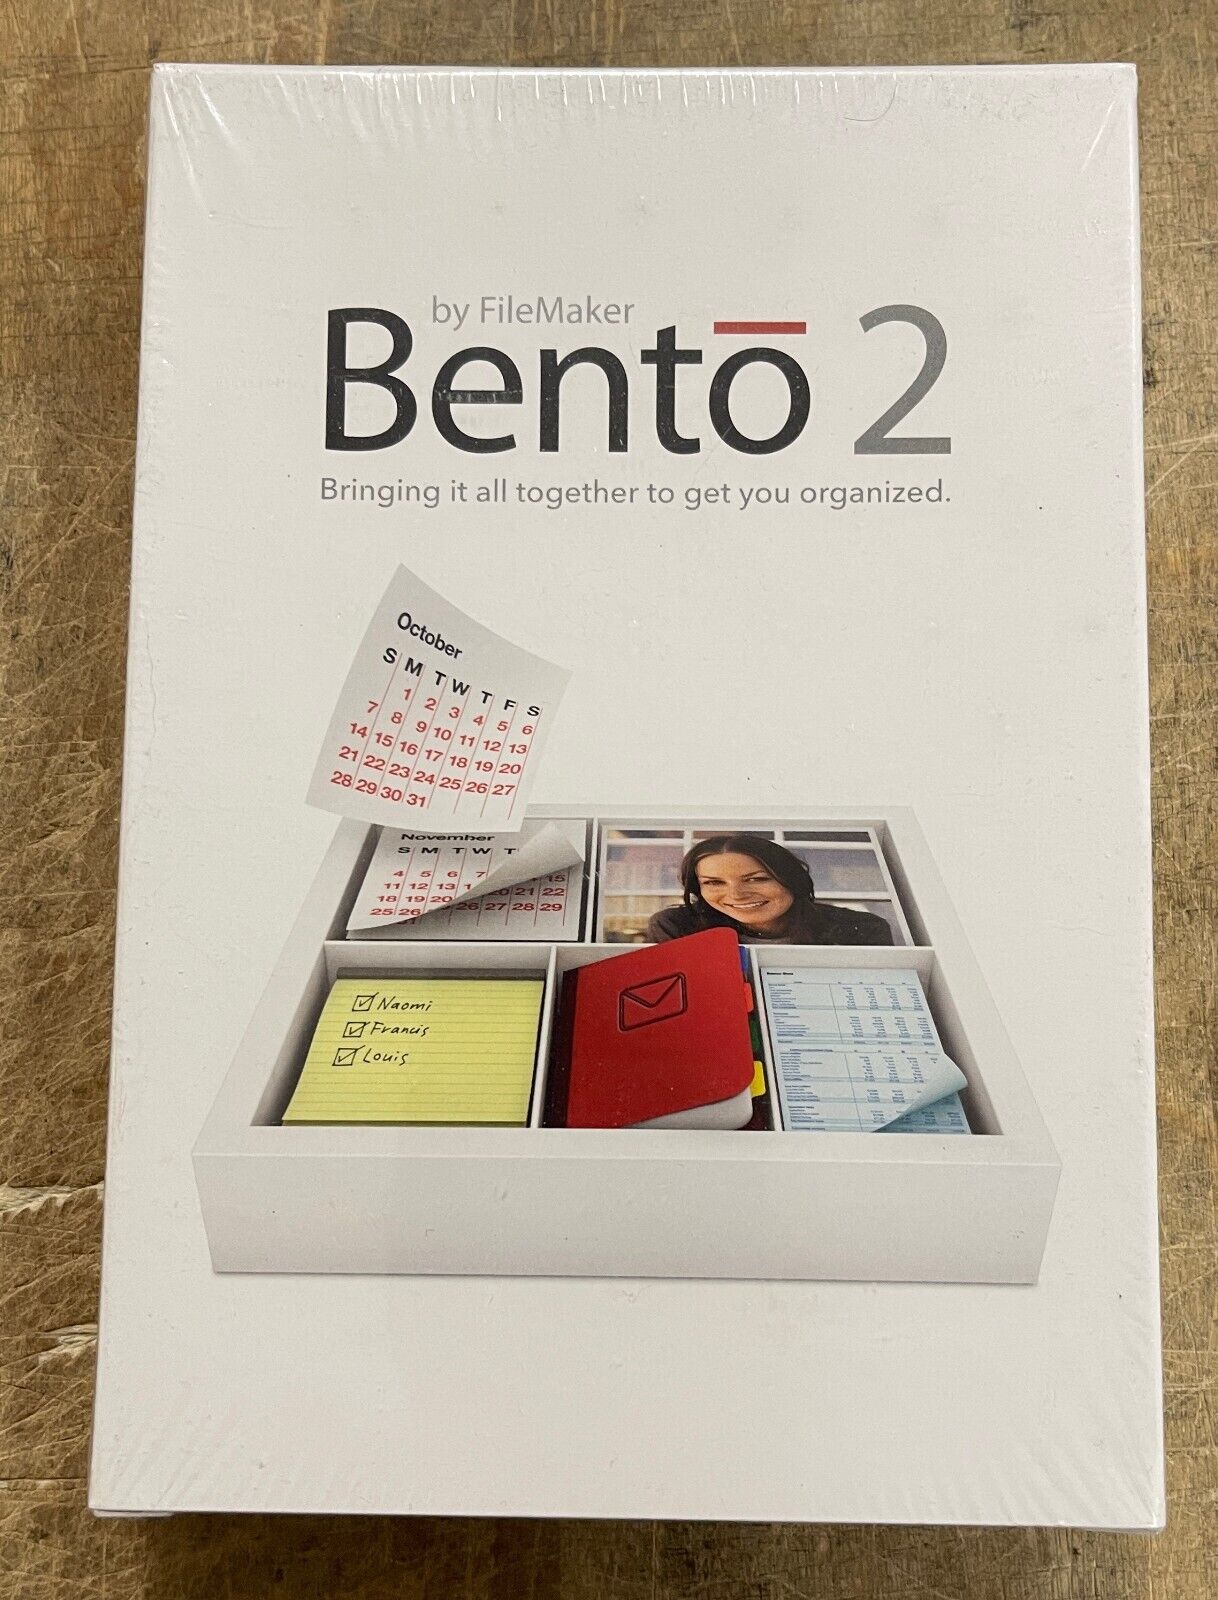 Bento 2 by FileMaker